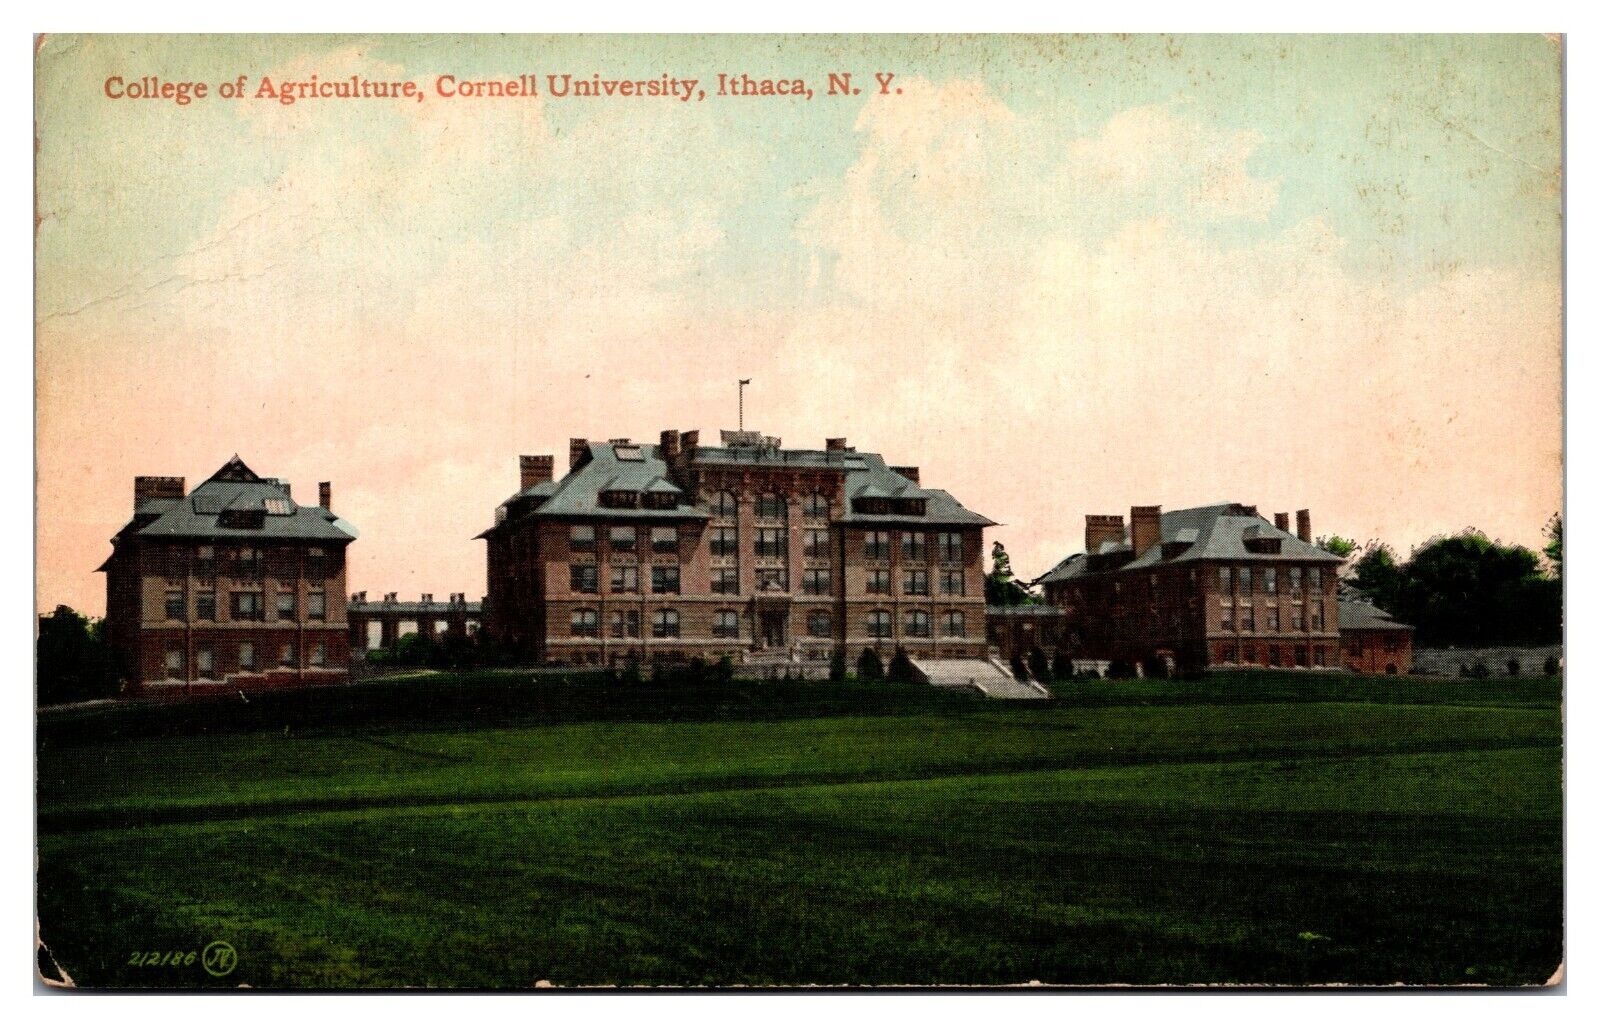 Antique College of Agriculture, Cornell University, Ithaca, NY Postcard